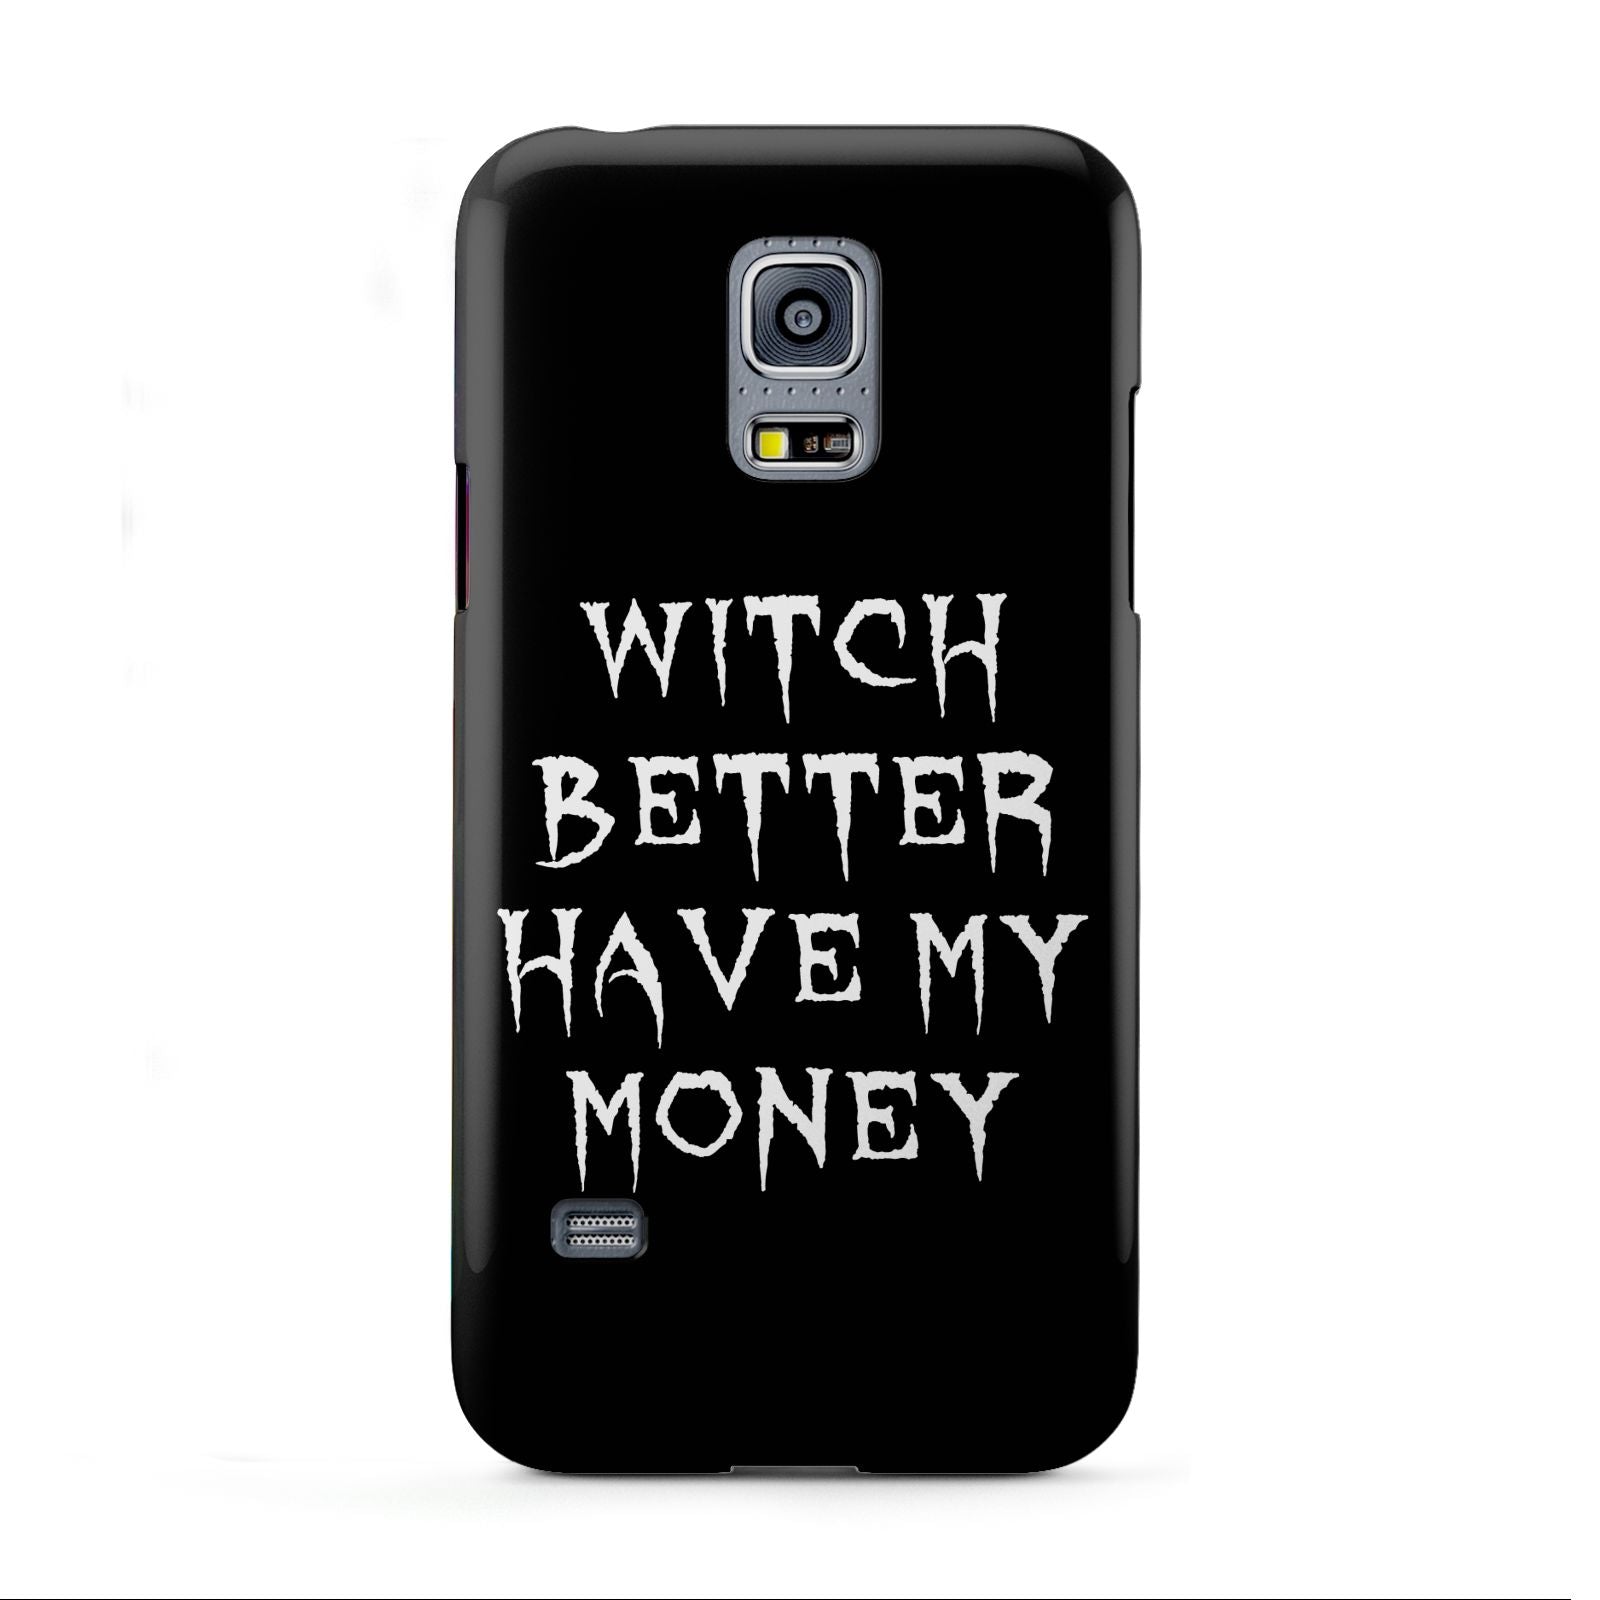 Witch Better Have My Money Samsung Galaxy S5 Mini Case